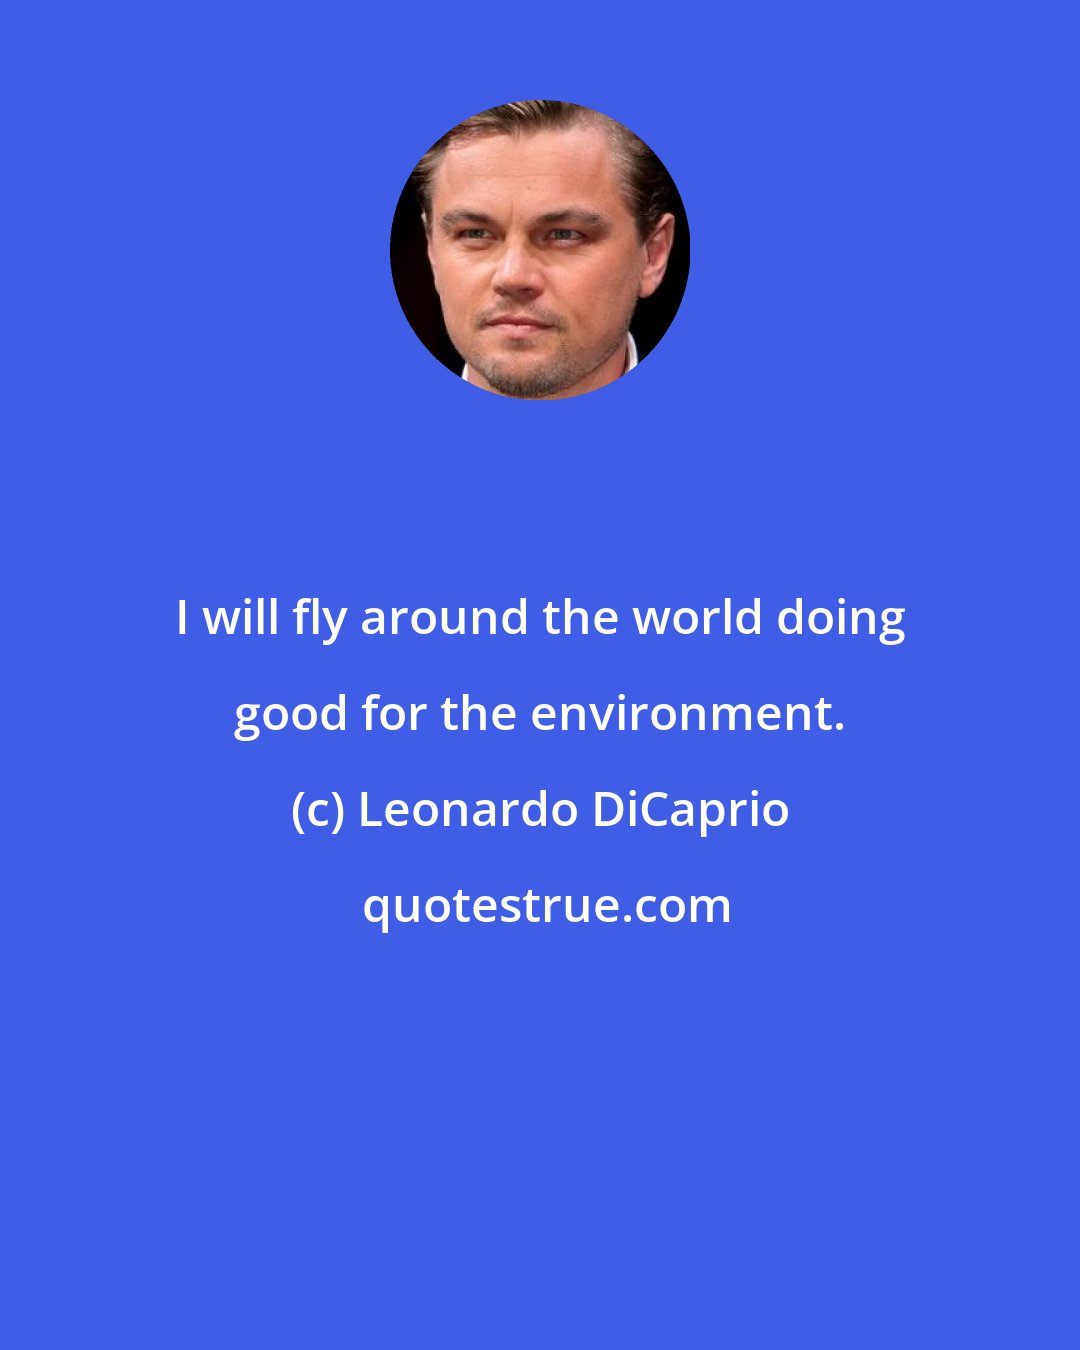 Leonardo DiCaprio: I will fly around the world doing good for the environment.